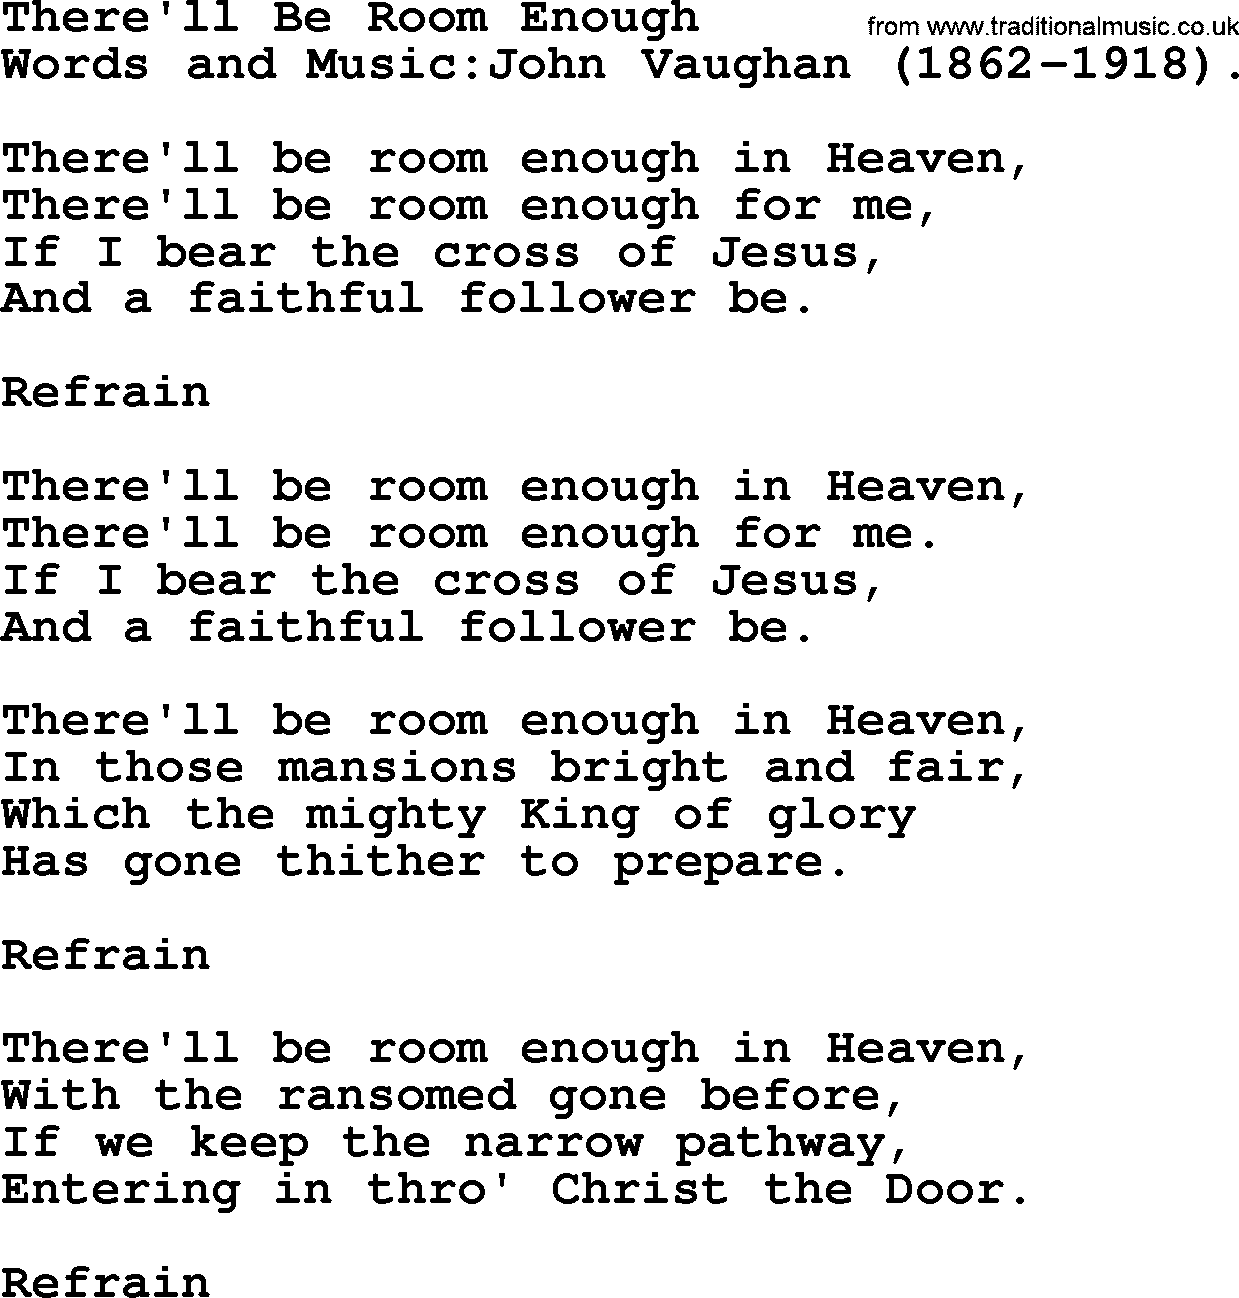 Songs and Hymns about Heaven: There'll Be Room Enough lyrics with PDF